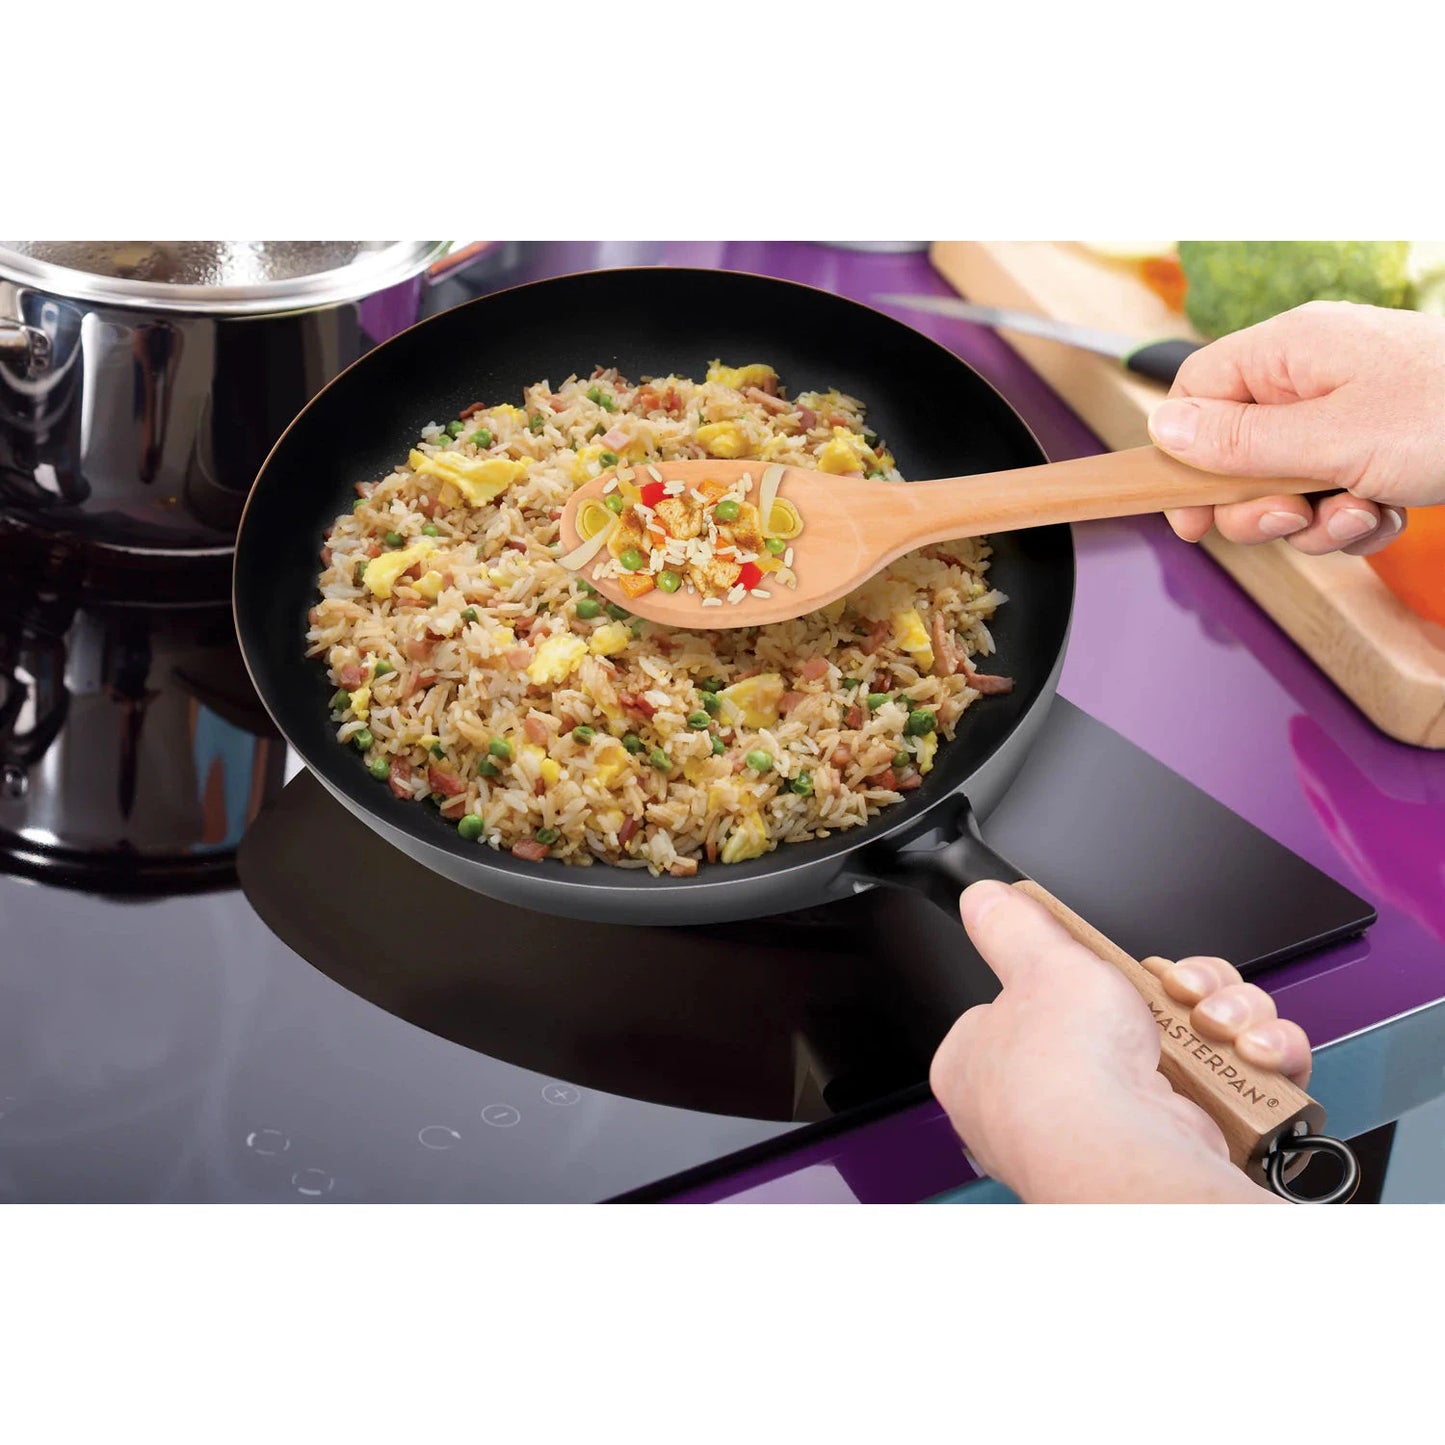 MASTERPAN Classico Series 12” Carbon Steel Wok With Glass Lid and Wooden Utensils, Non-stick Flat Bottom Asian Stir-Fry Cookware With Wooden Handle